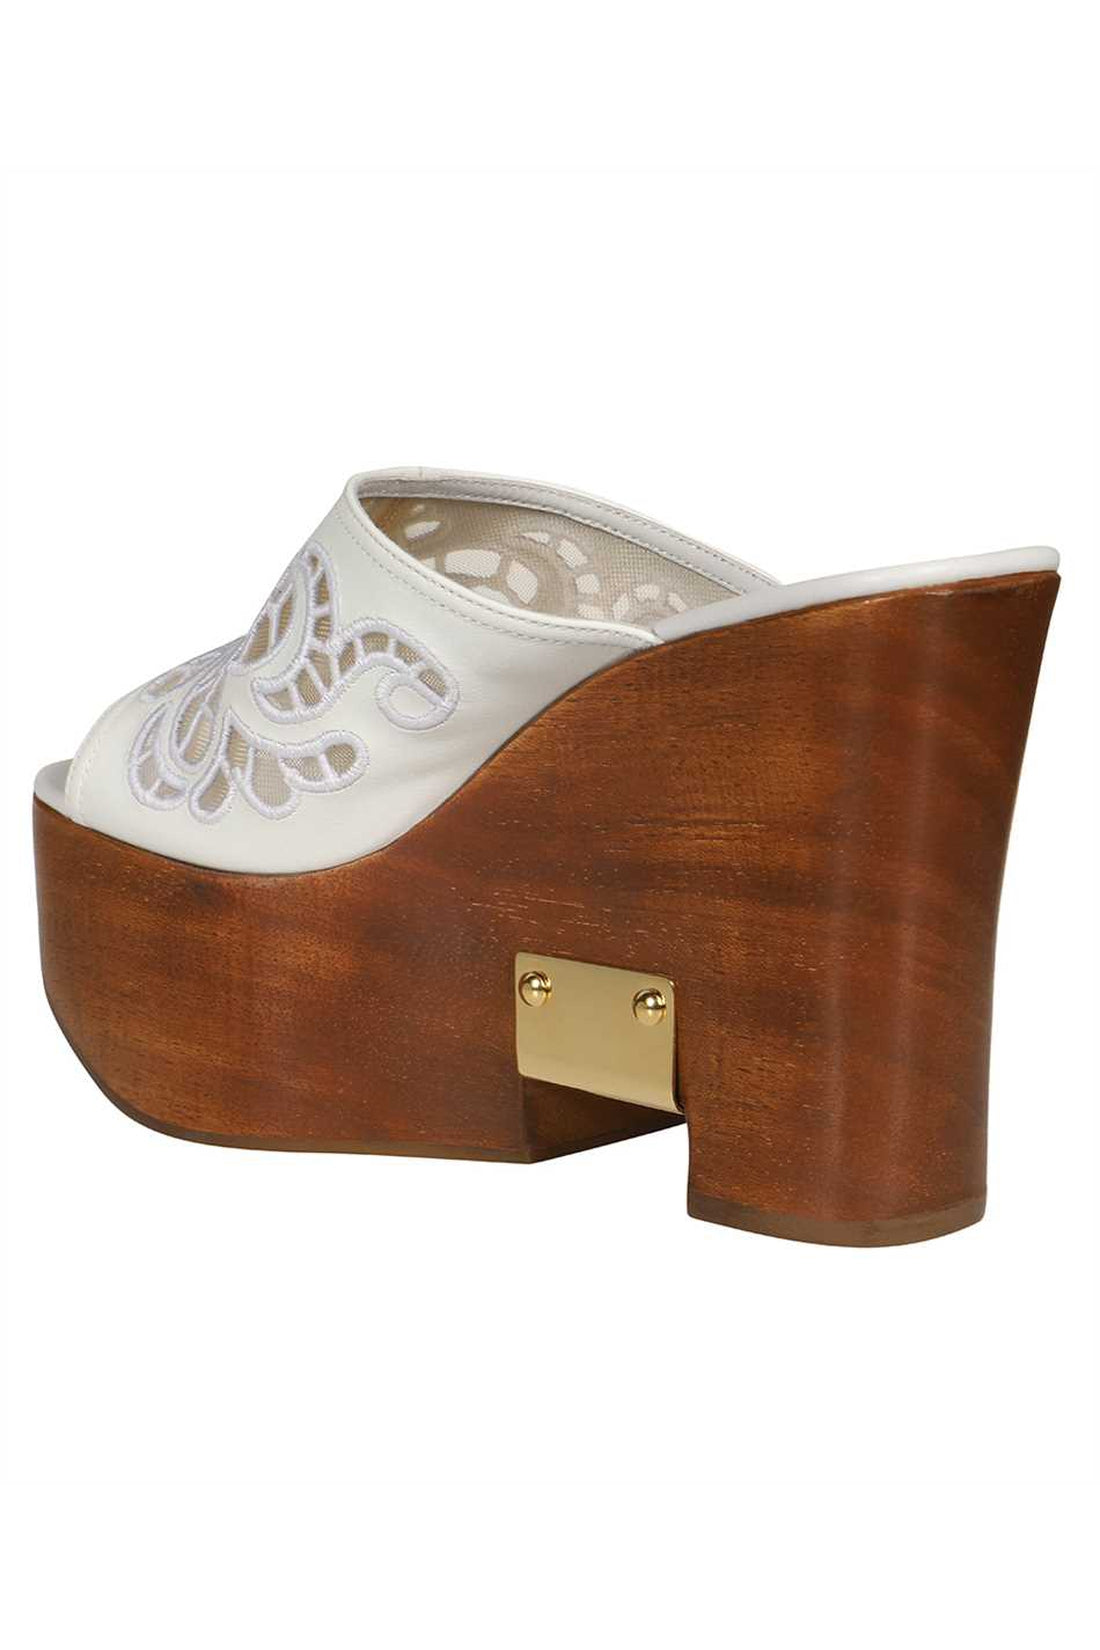 Dolce & Gabbana-OUTLET-SALE-Leather wedge mules-ARCHIVIST